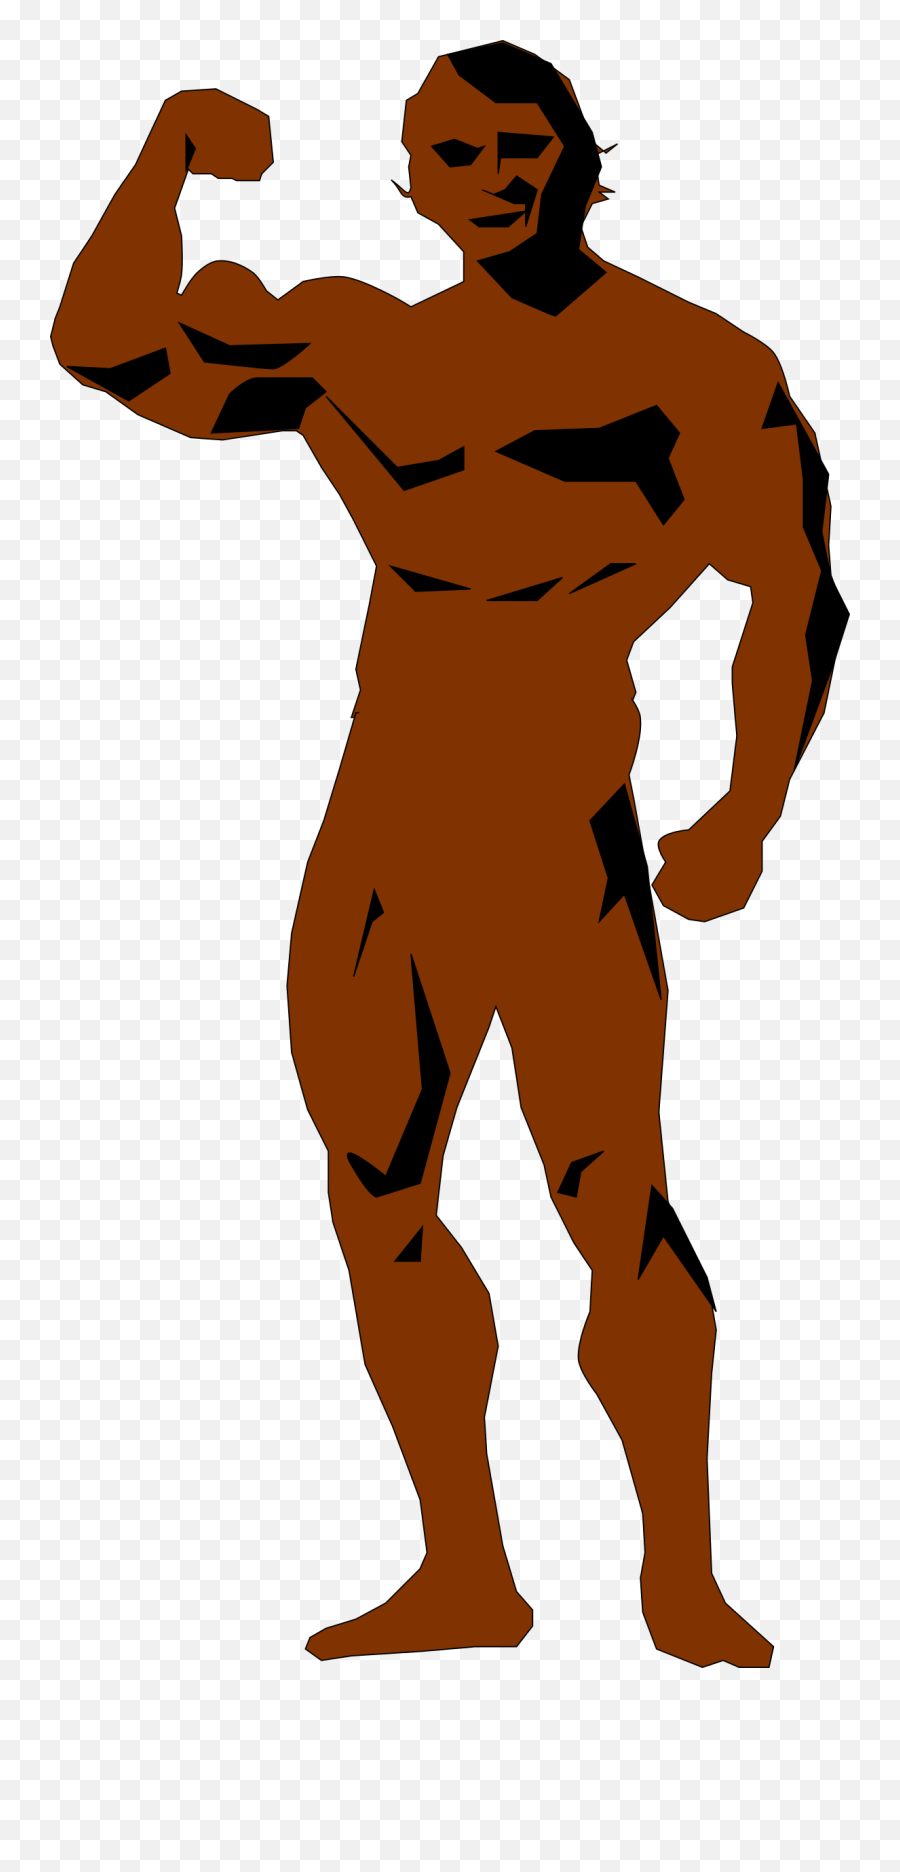 Download Free Png Body Builder - Dlpngcom Tone Body Icons,Body Builder Png